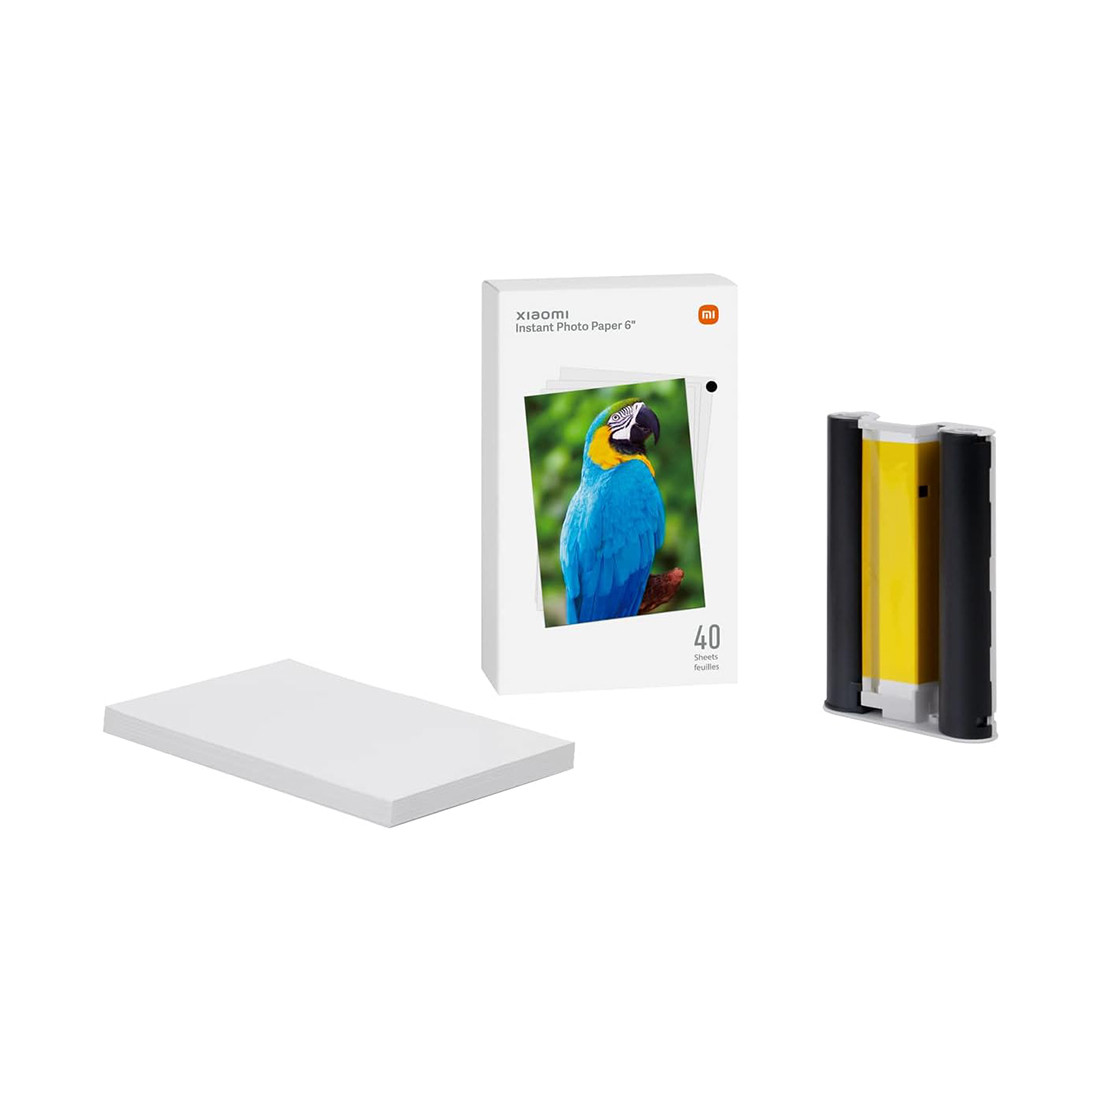 Фотобумага Xiaomi Instant Photo Paper 6" (40 Sheets) 2-015067 SD20